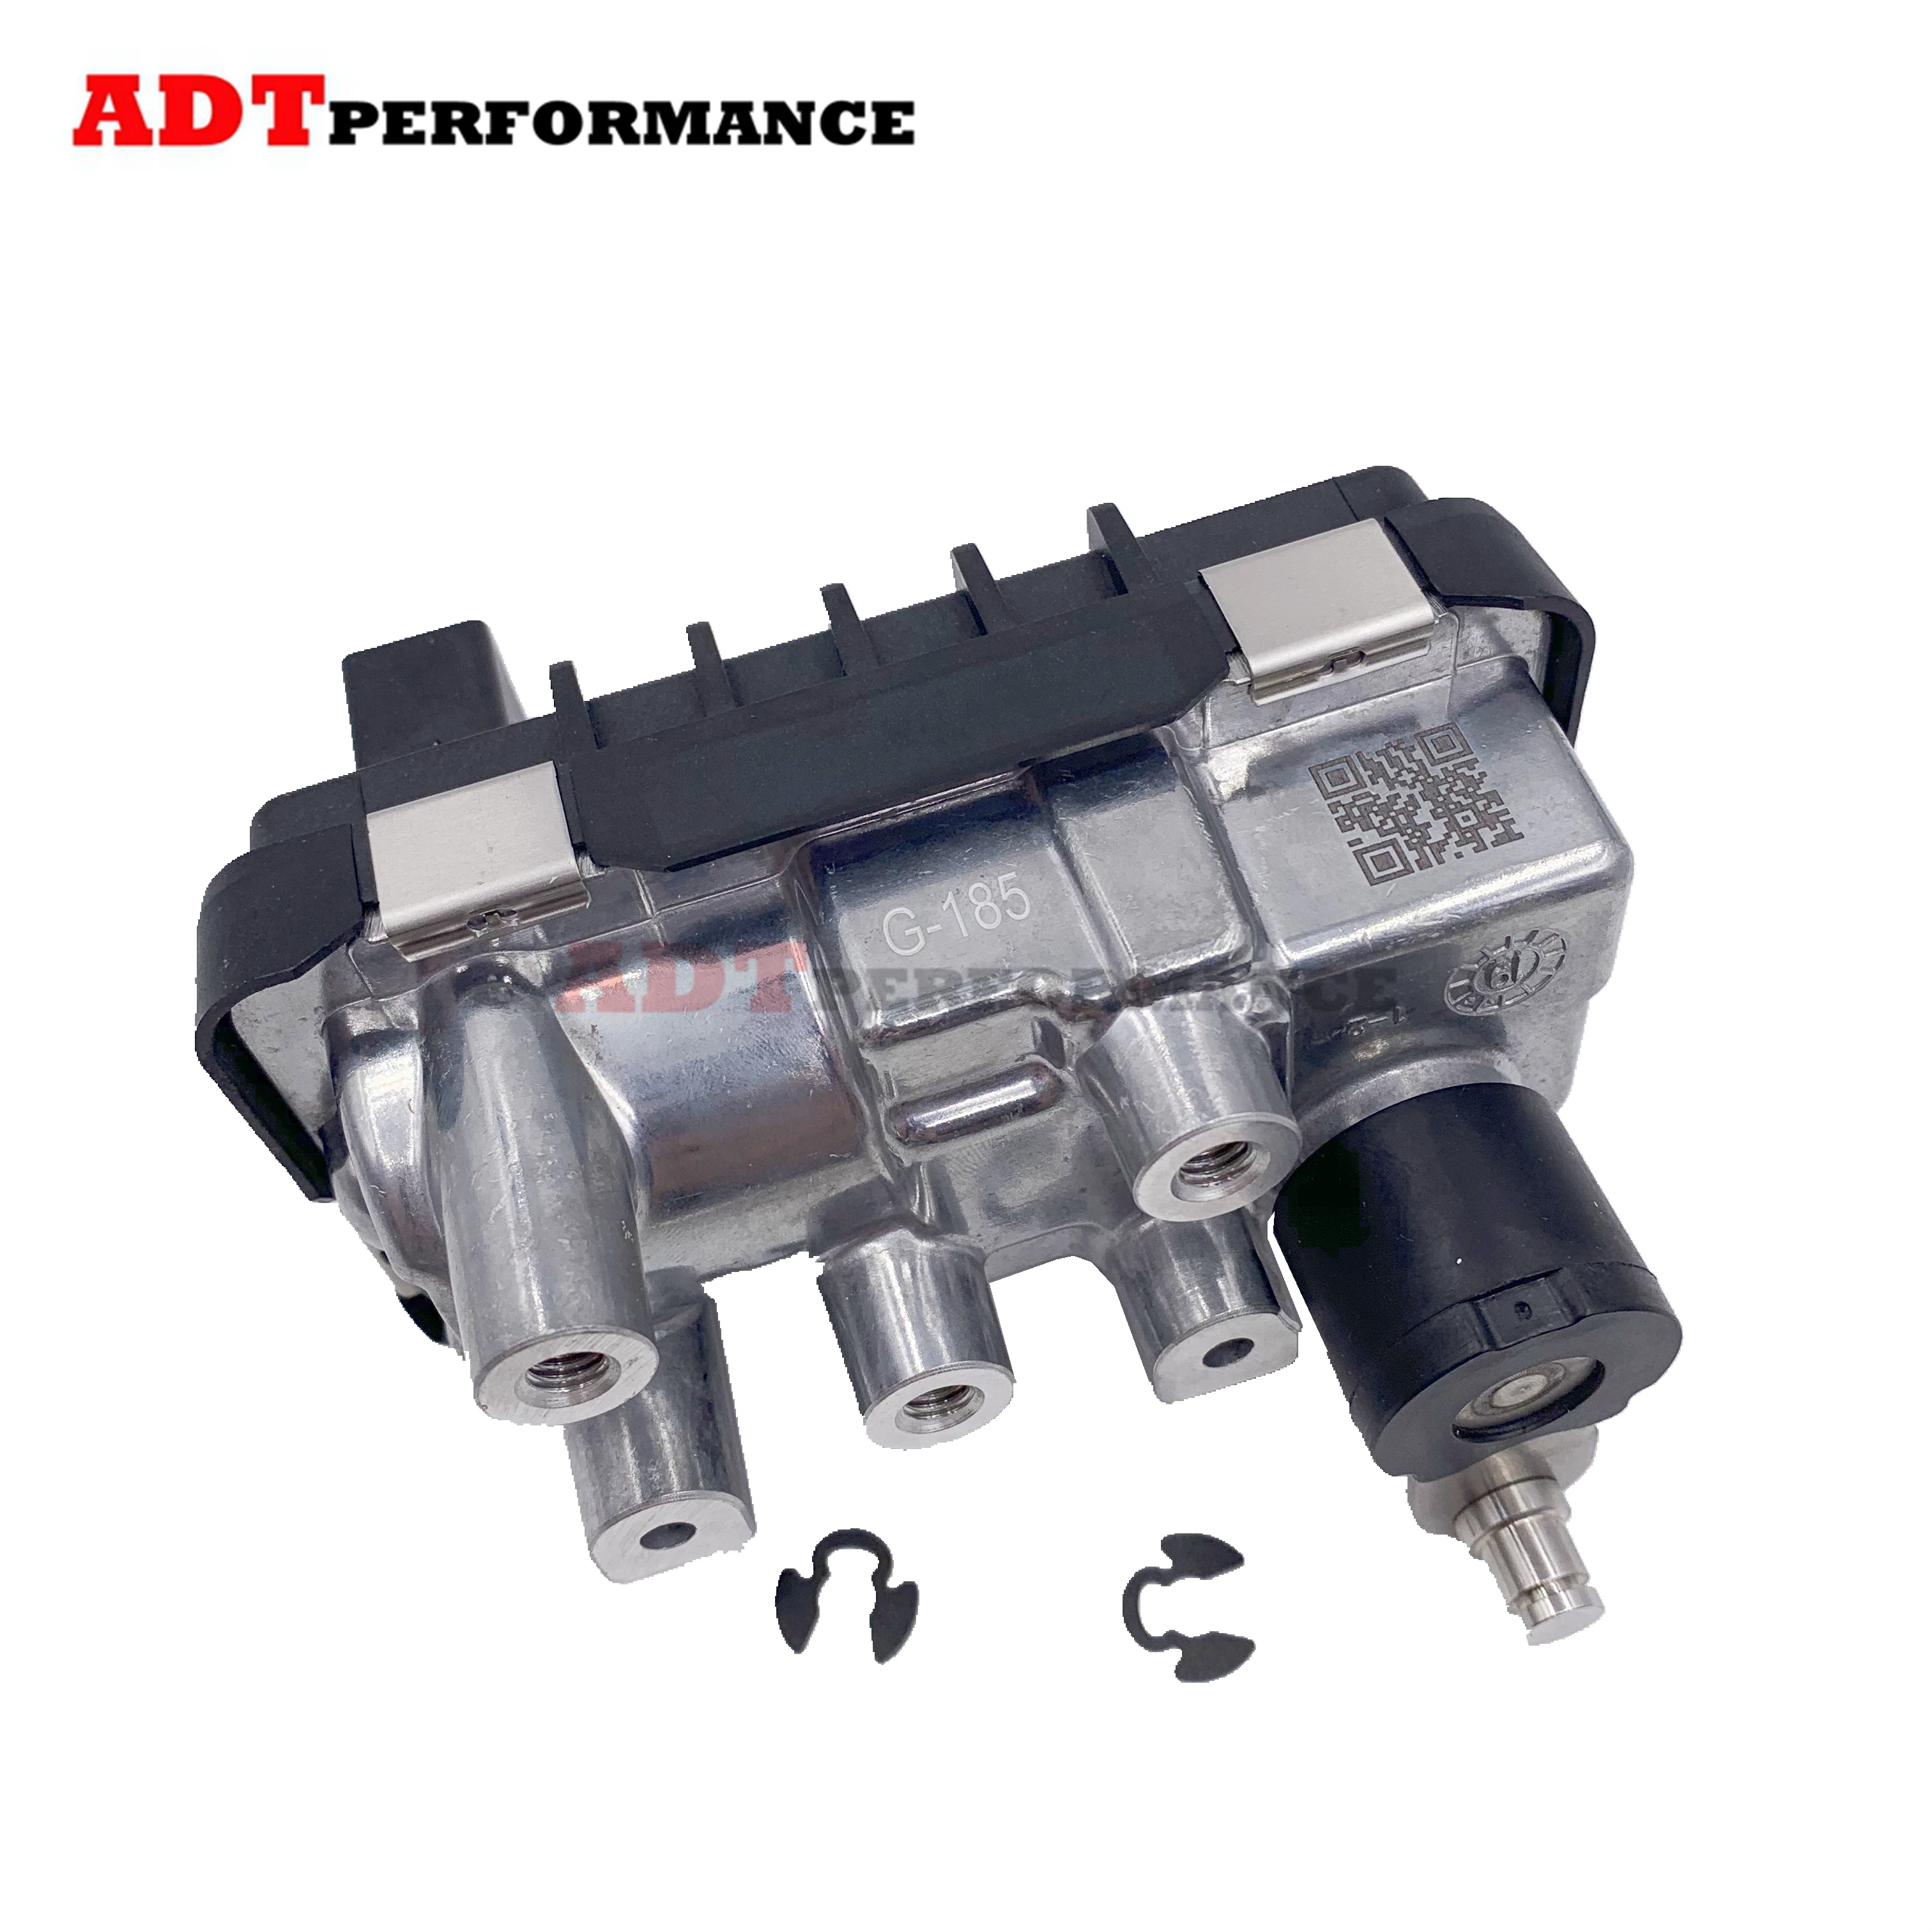 

G-185 G185 712120 GT1852V Turbo Electronic Actuator 6NW008412 A6460900180 Turbine Wastegate for Mercedes C-Klasse 220 CDI W203 1